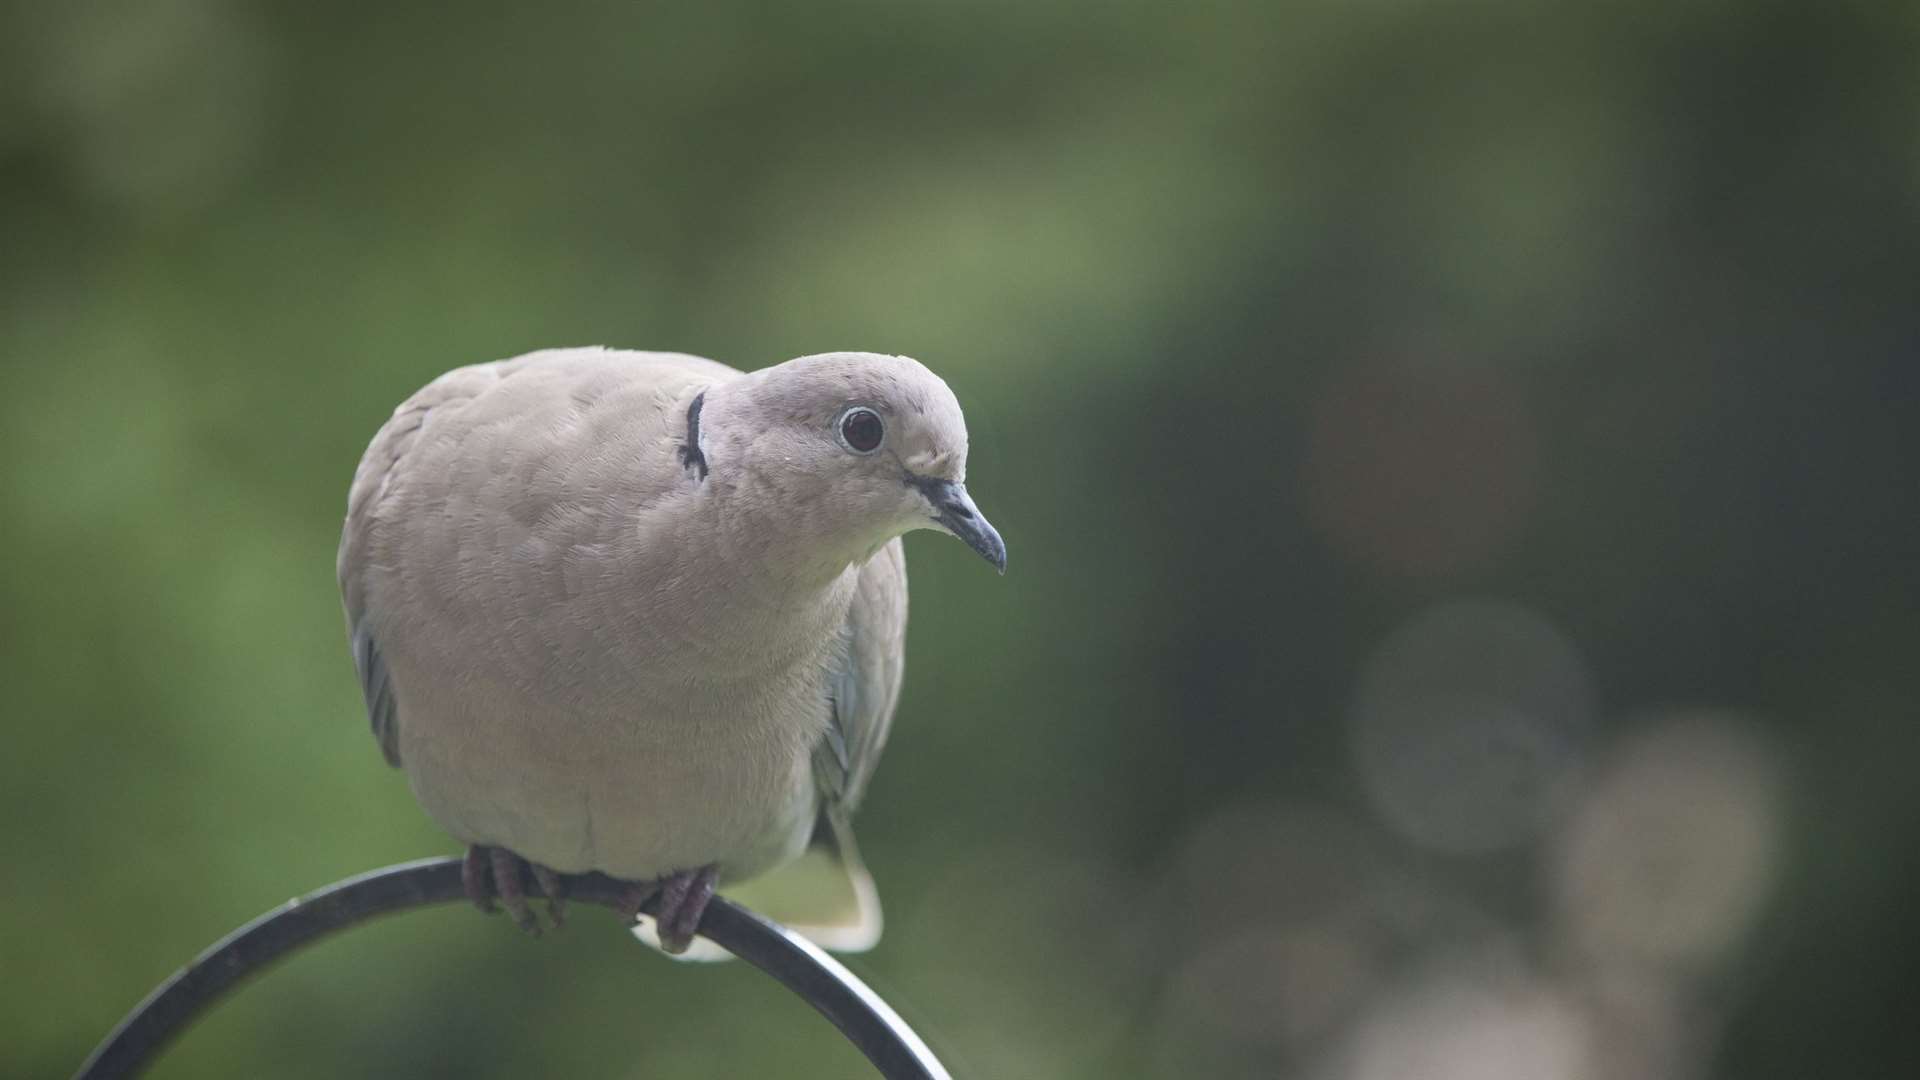 Doves can also suffer at the hands of the disease. Image: iStock.